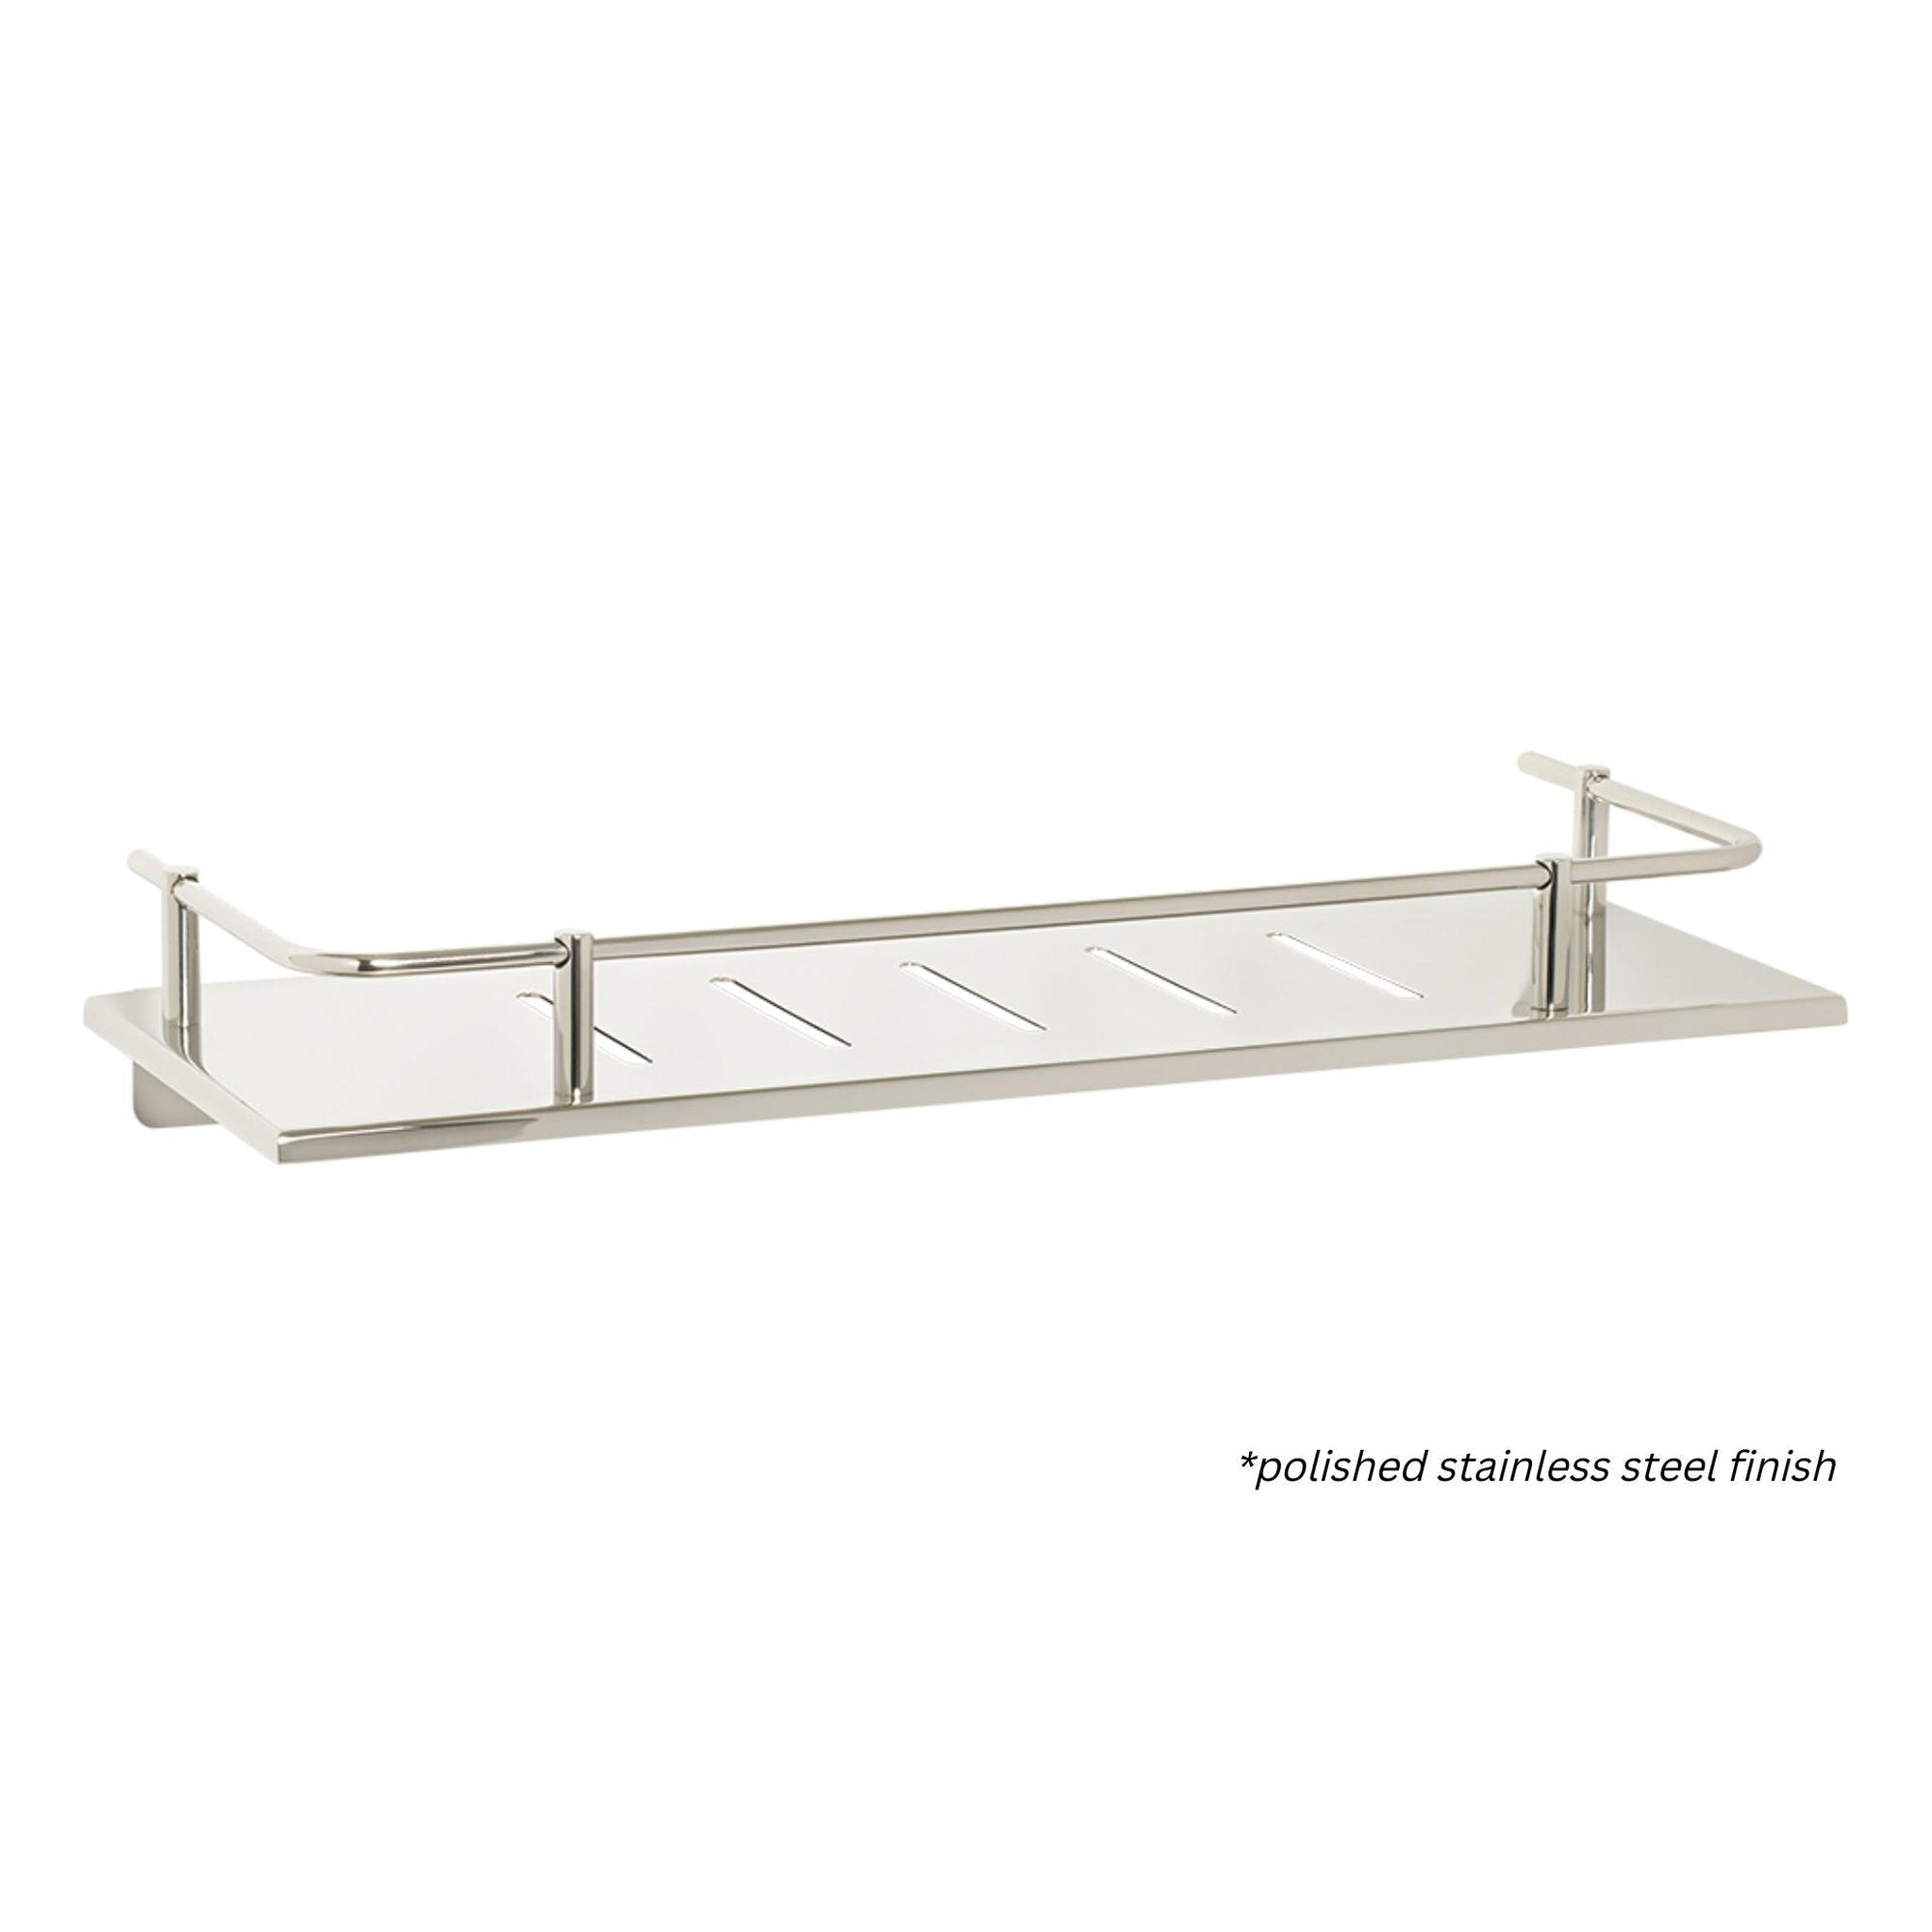 http://usbathstore.com/cdn/shop/products/Seachrome-Lifestyle-and-Wellness-720-Series-16-x-6-Rectangular-Sundries-Shower-Shelf-With-Rail-in-White-Wrinkle-Powder-Coated-Stainless-Finish.jpg?v=1663624583